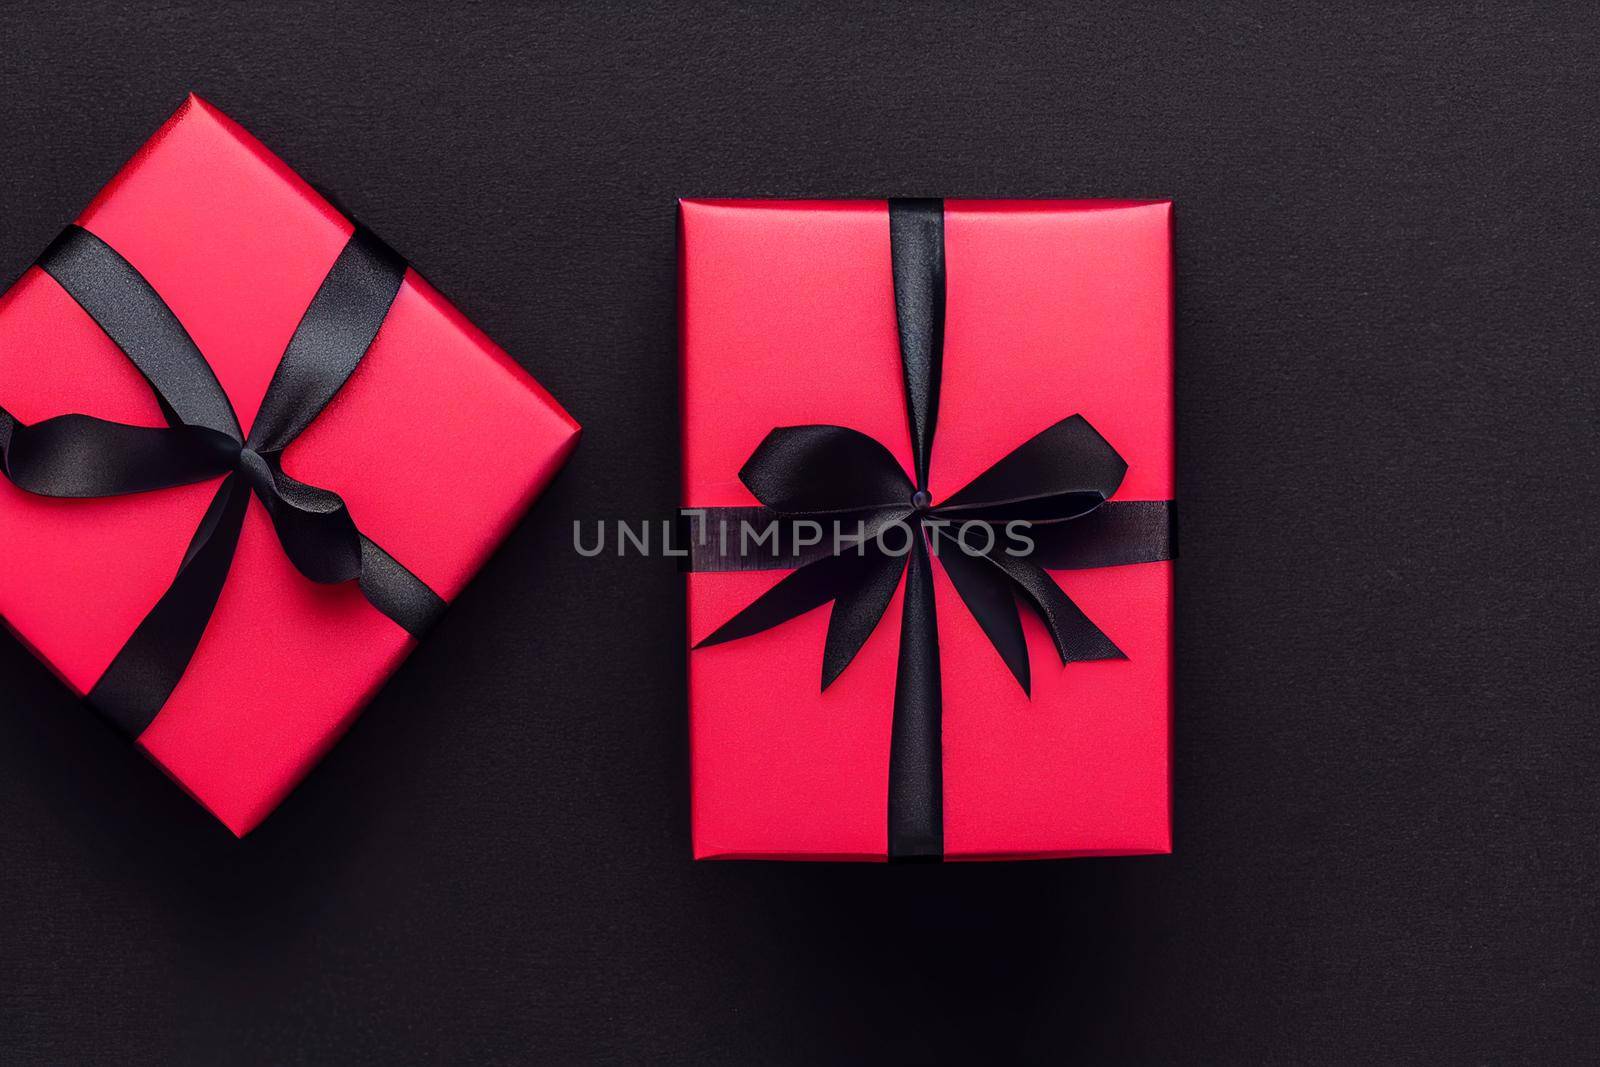 3D Render of red color gift box with black ribbon isolated against black background and Christmas decorations, top view design.